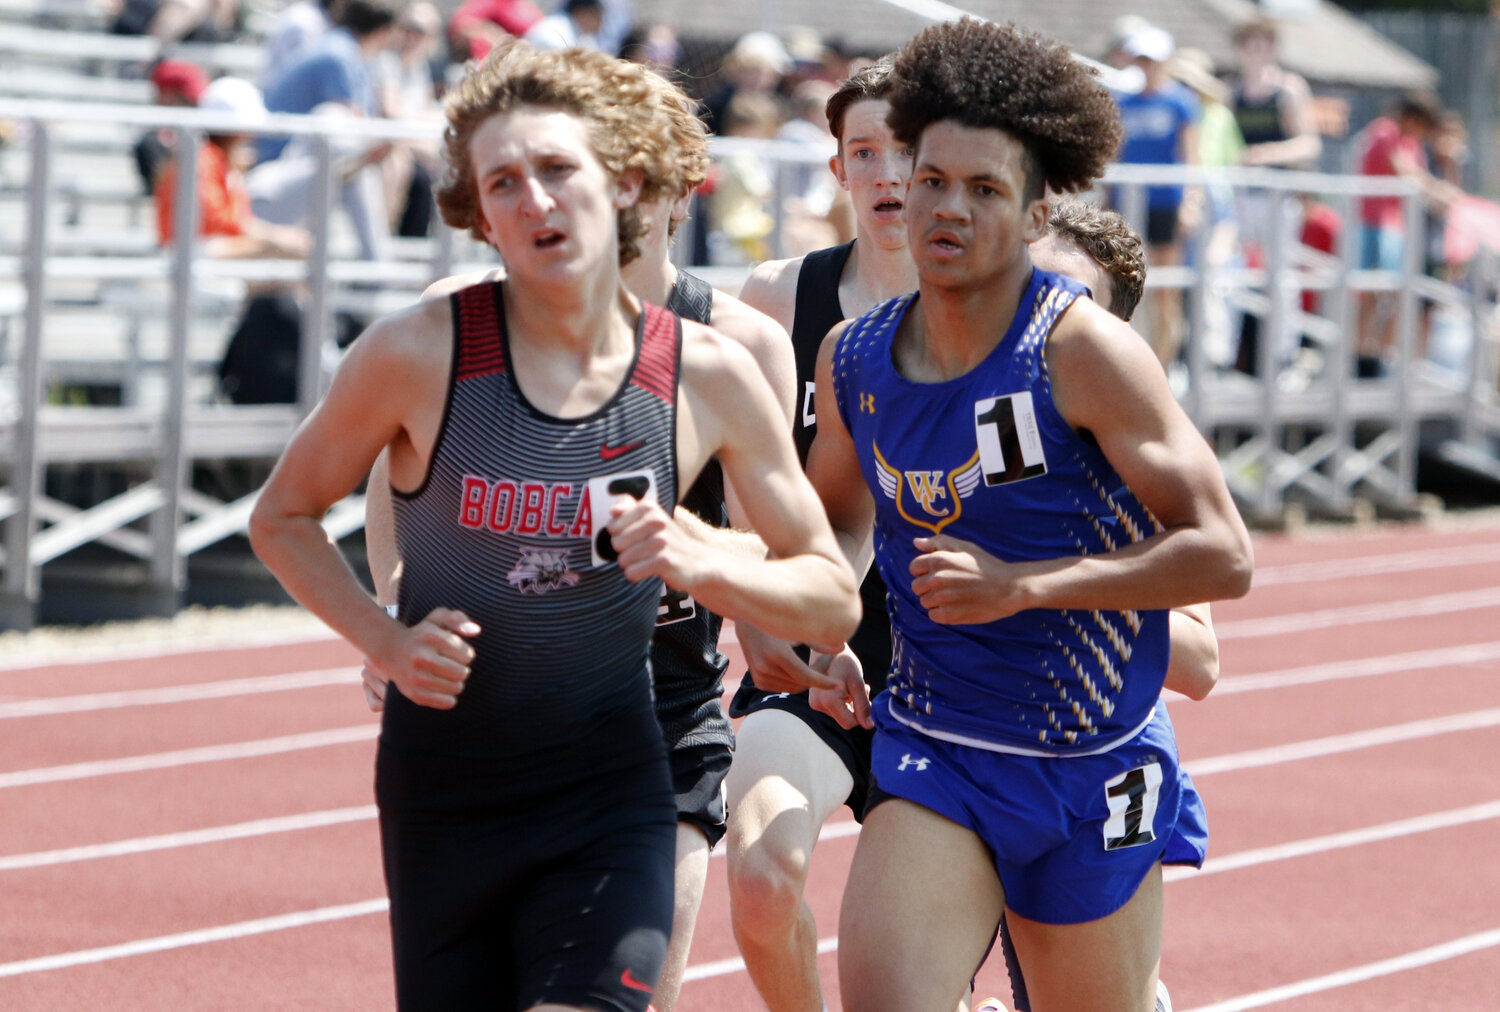 Isaiah Yoder looks to catch the leader during the Class 3 1600-meter run.